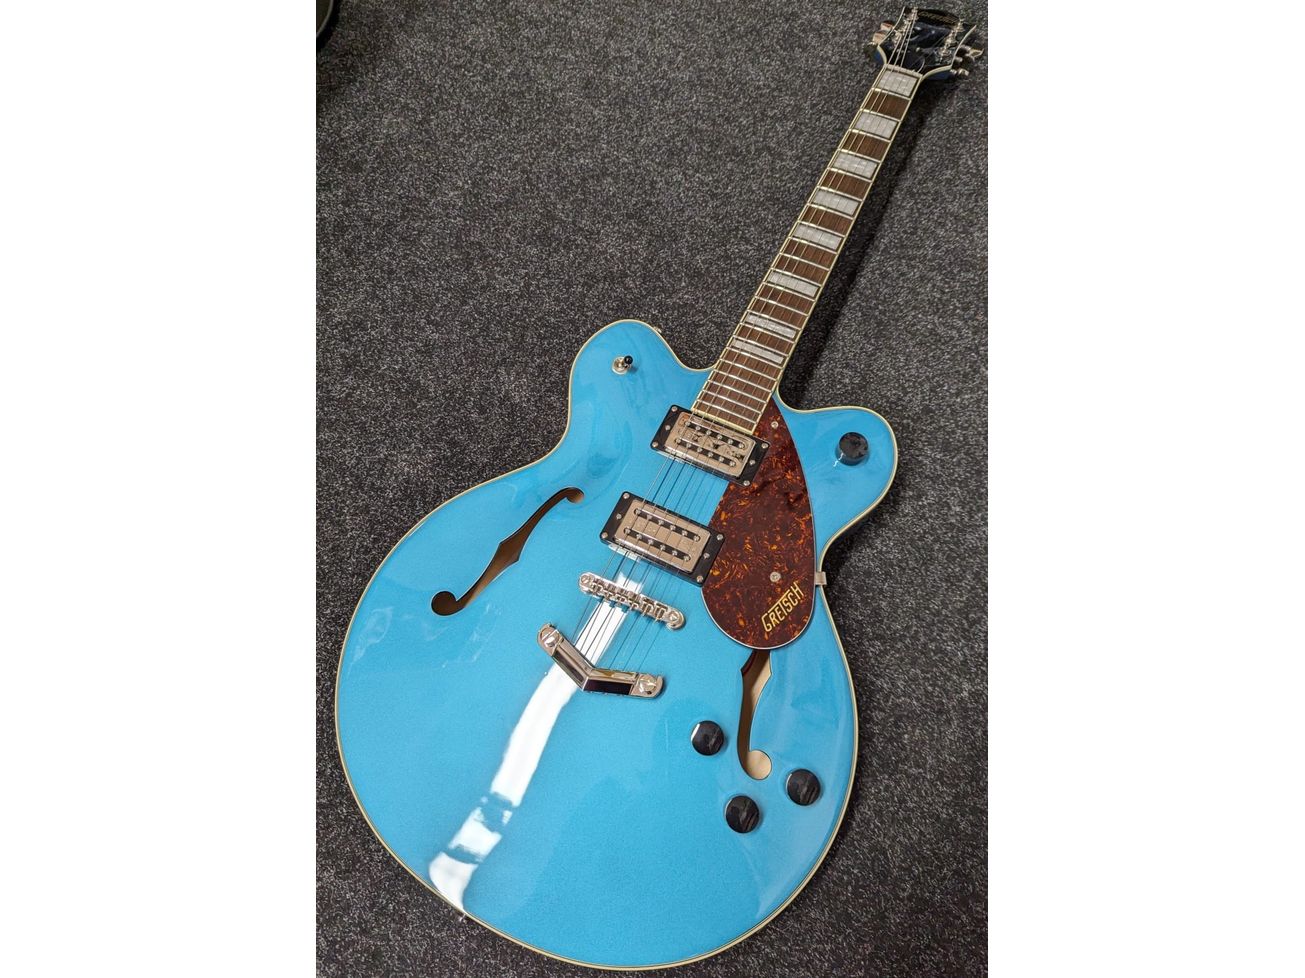 Gretsch G2622 Streamliner Electric Guitar Ocean Turquoise Pre-Owned